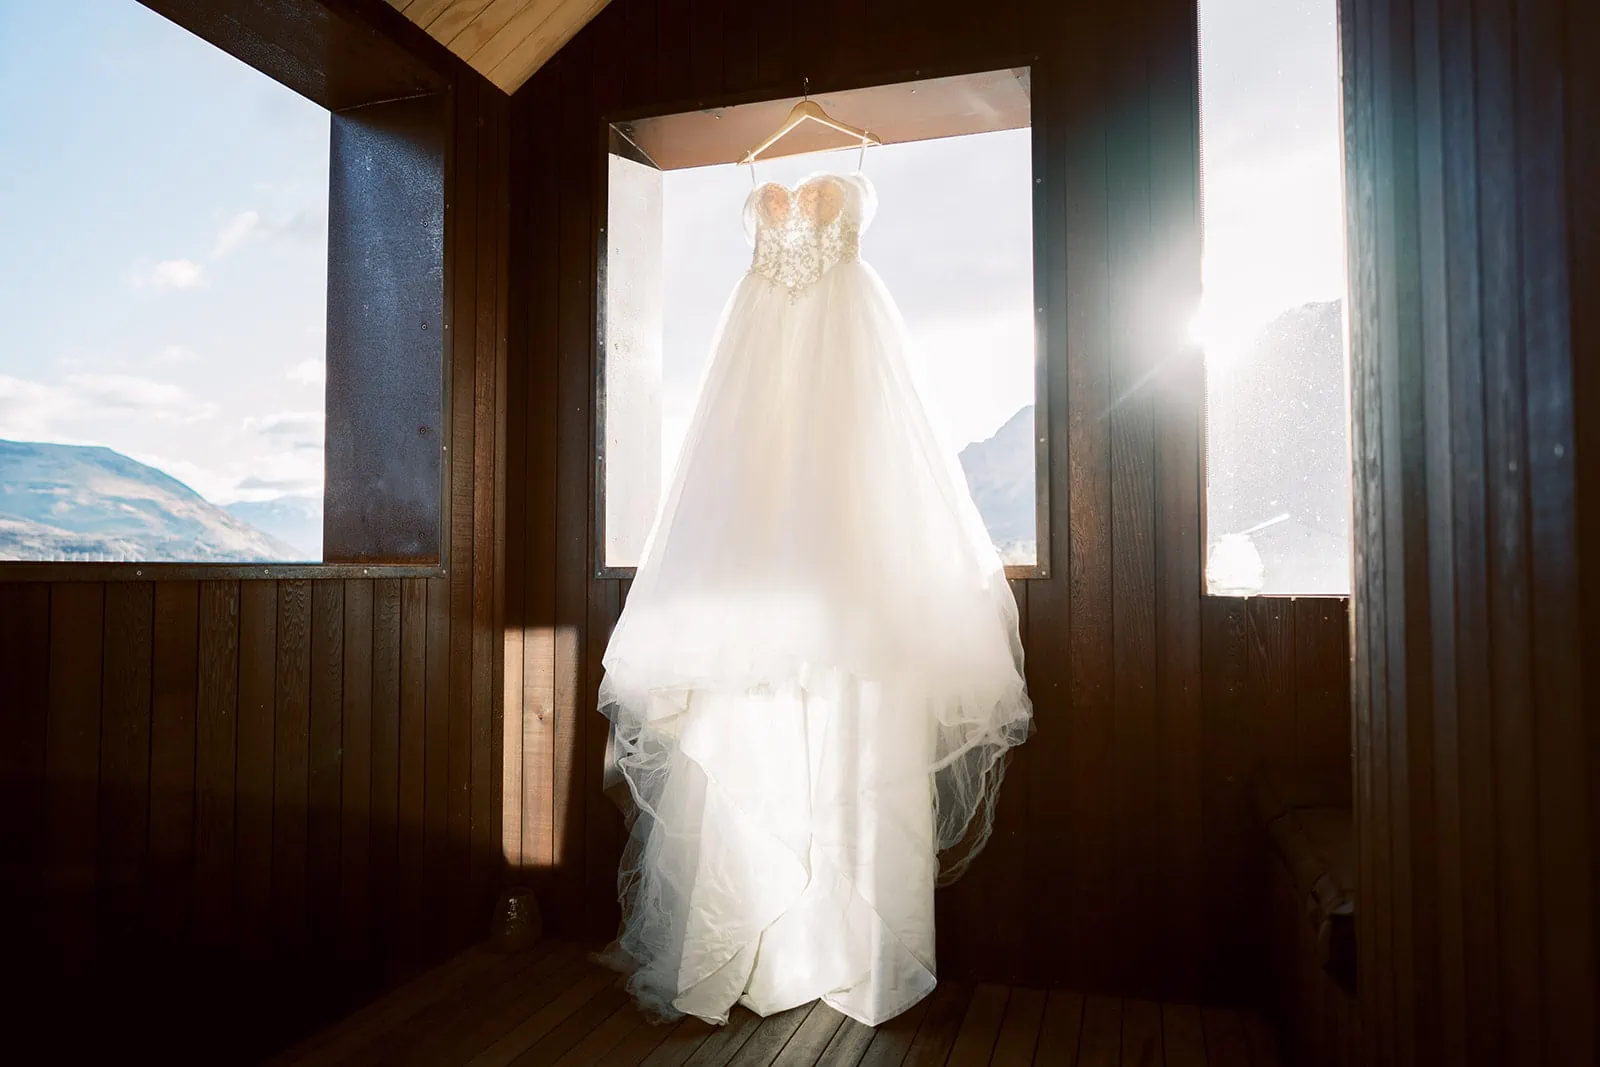 Queenstown New Zealand Elopement Wedding Photographer - A wedding dress hanging from a window in a cabin, emphasizing cost comparison between elopement and traditional weddings.